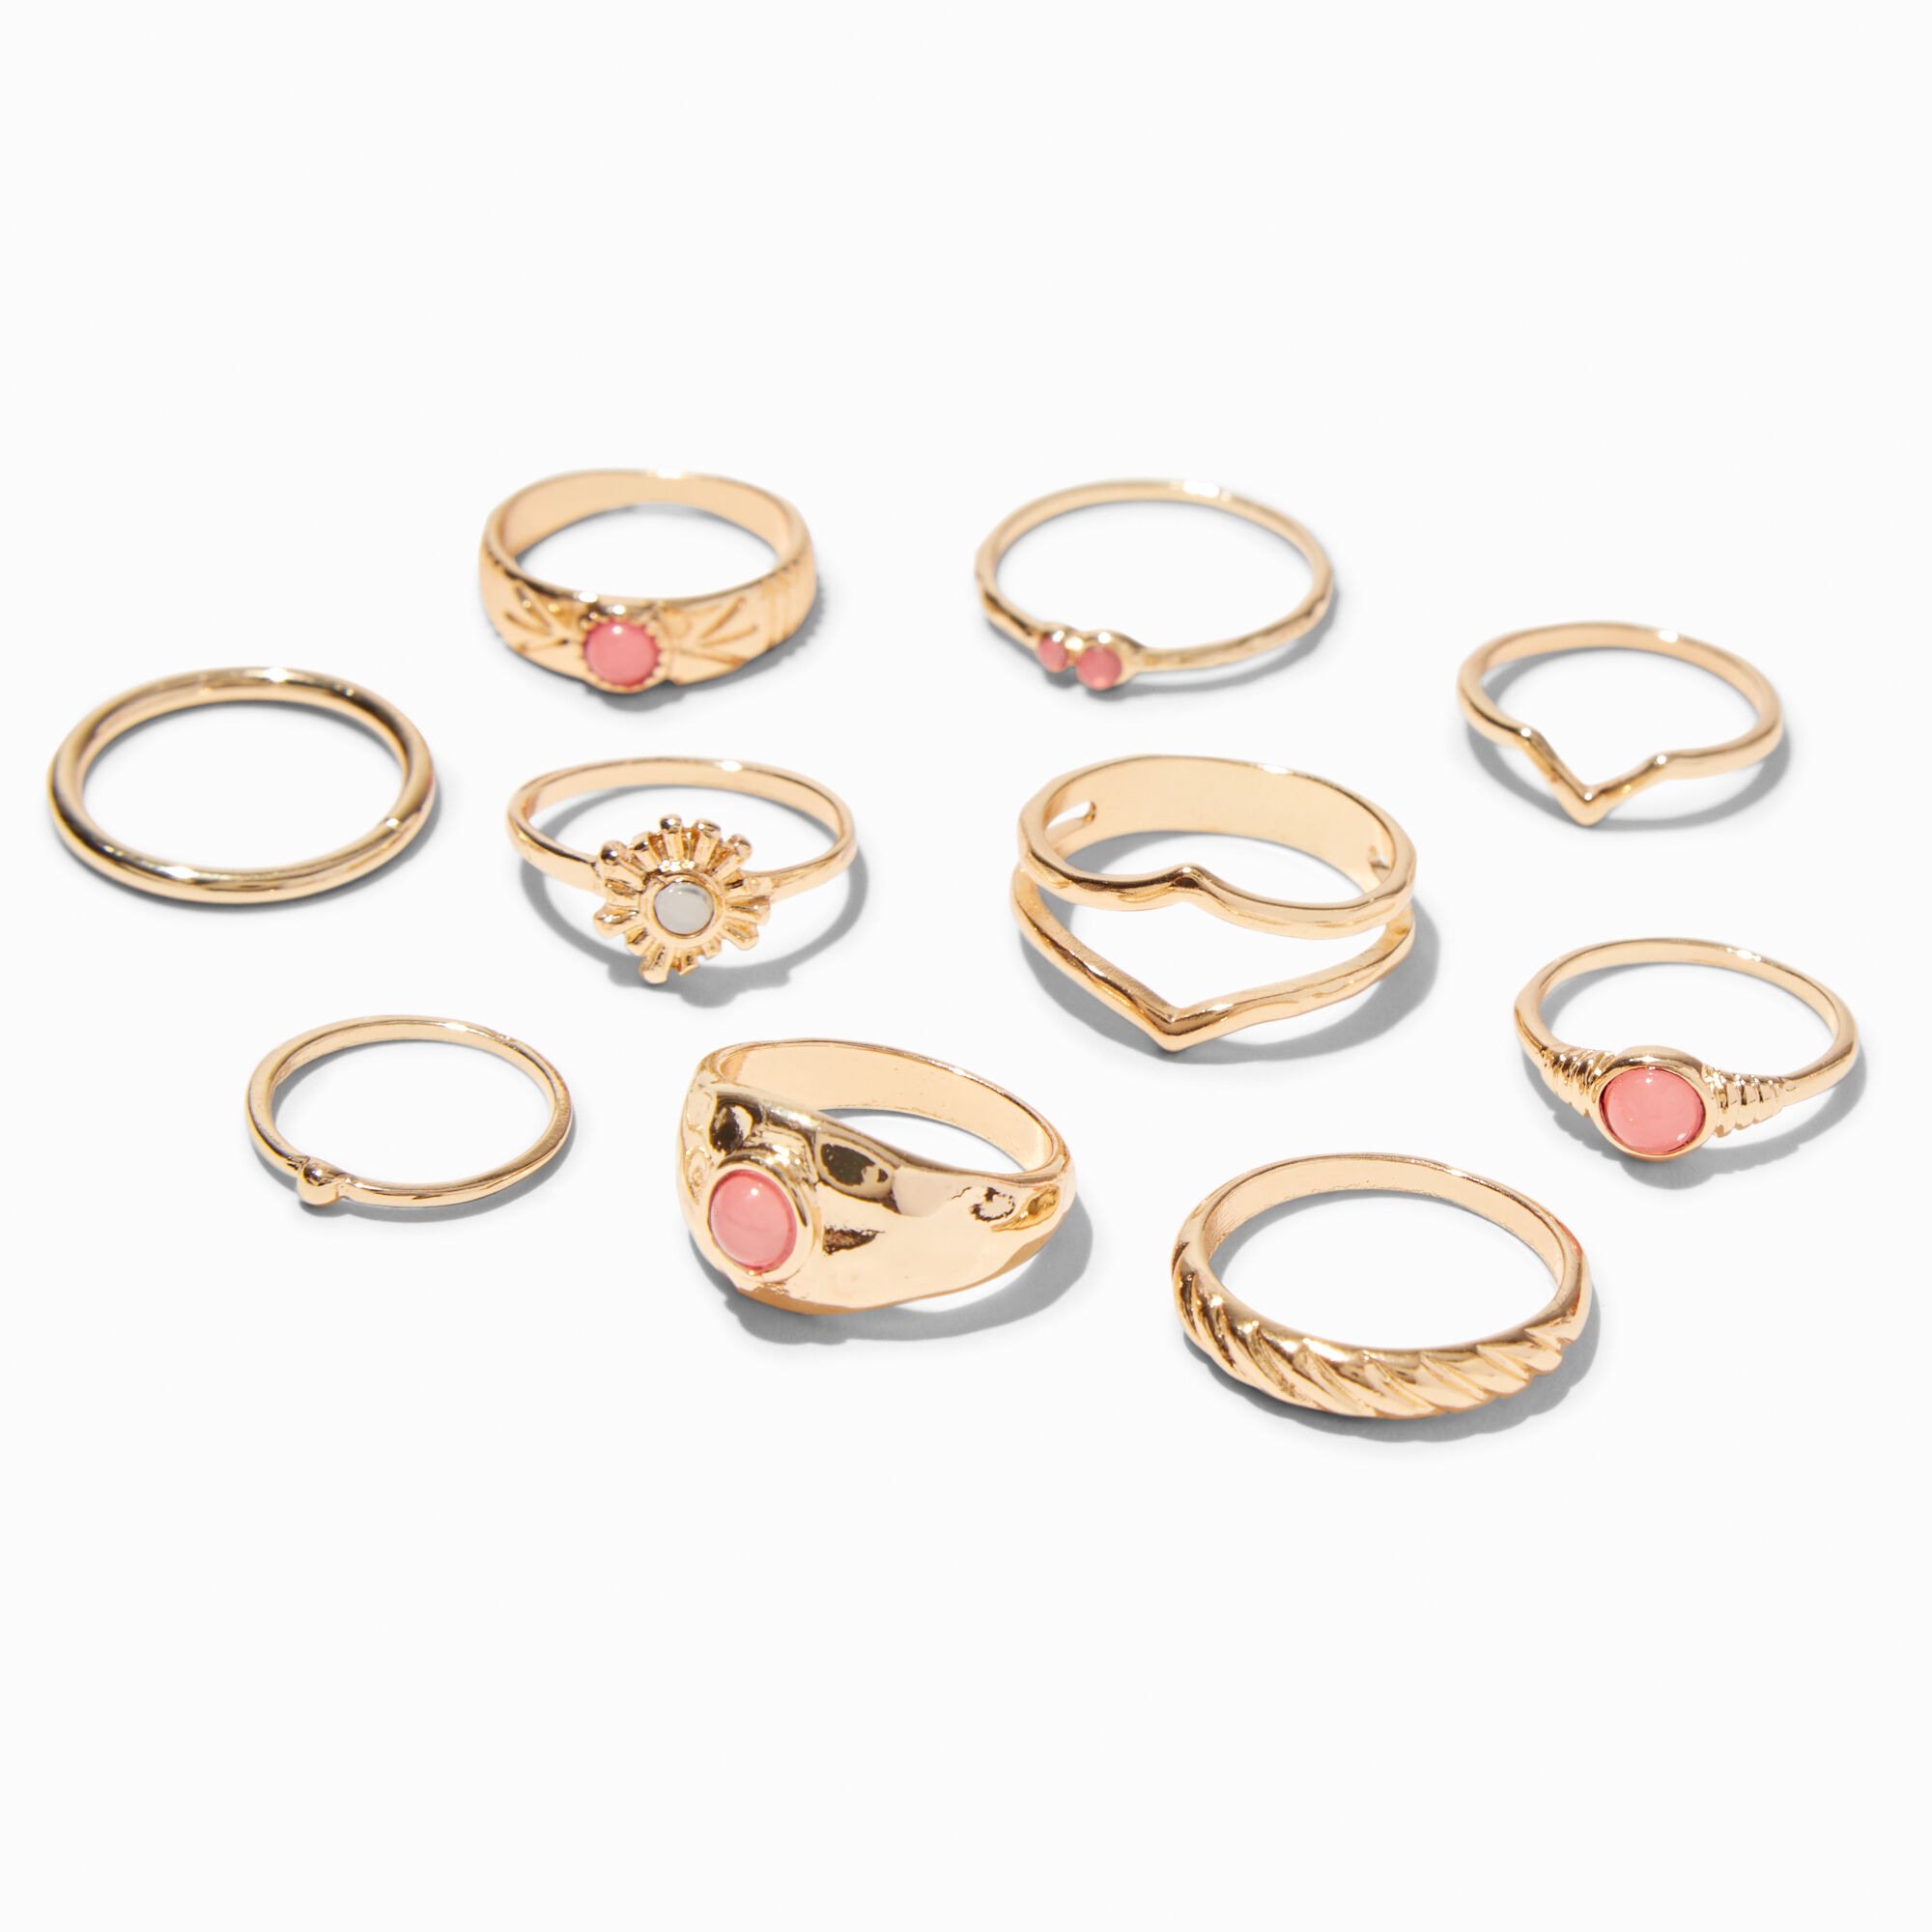 View Claires GoldTone Geometric Rings 10 Pack Pink information